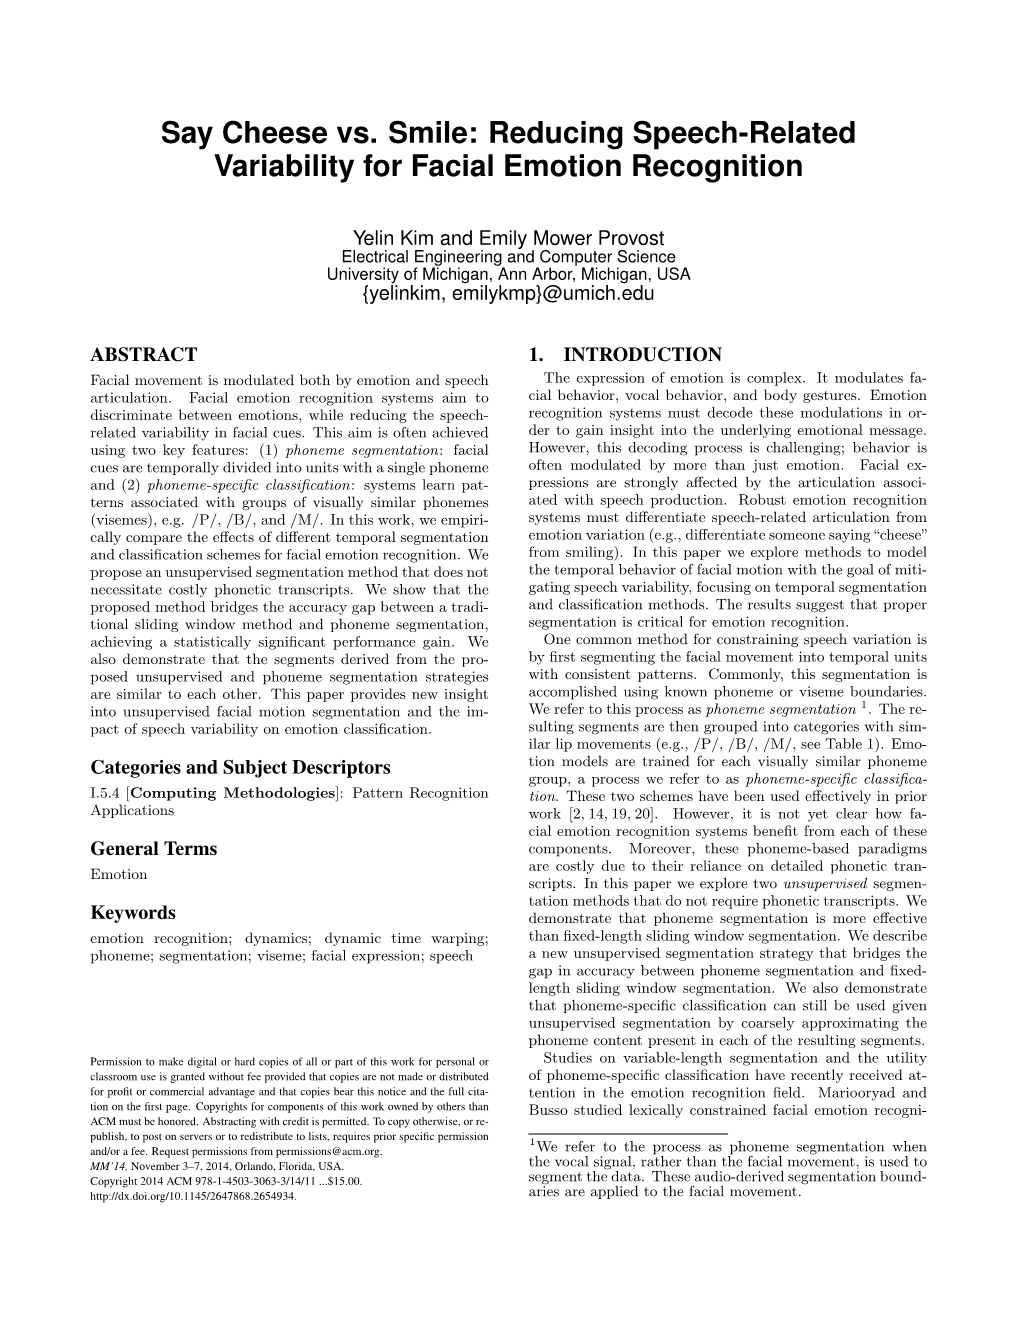 Reducing Speech-Related Variability for Facial Emotion Recognition